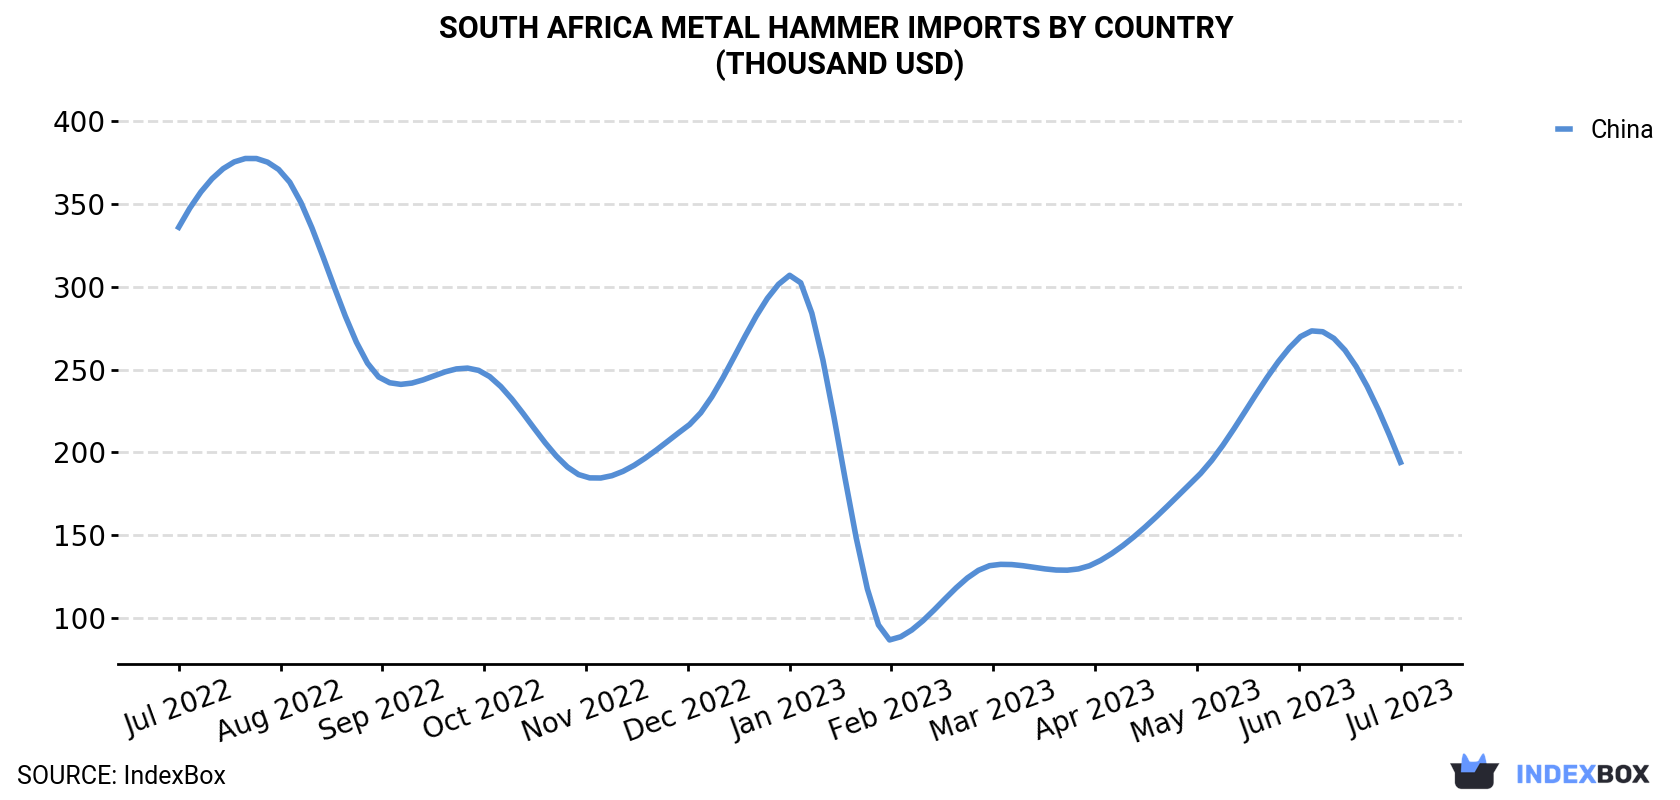 South Africa Metal Hammer Imports By Country (Thousand USD)